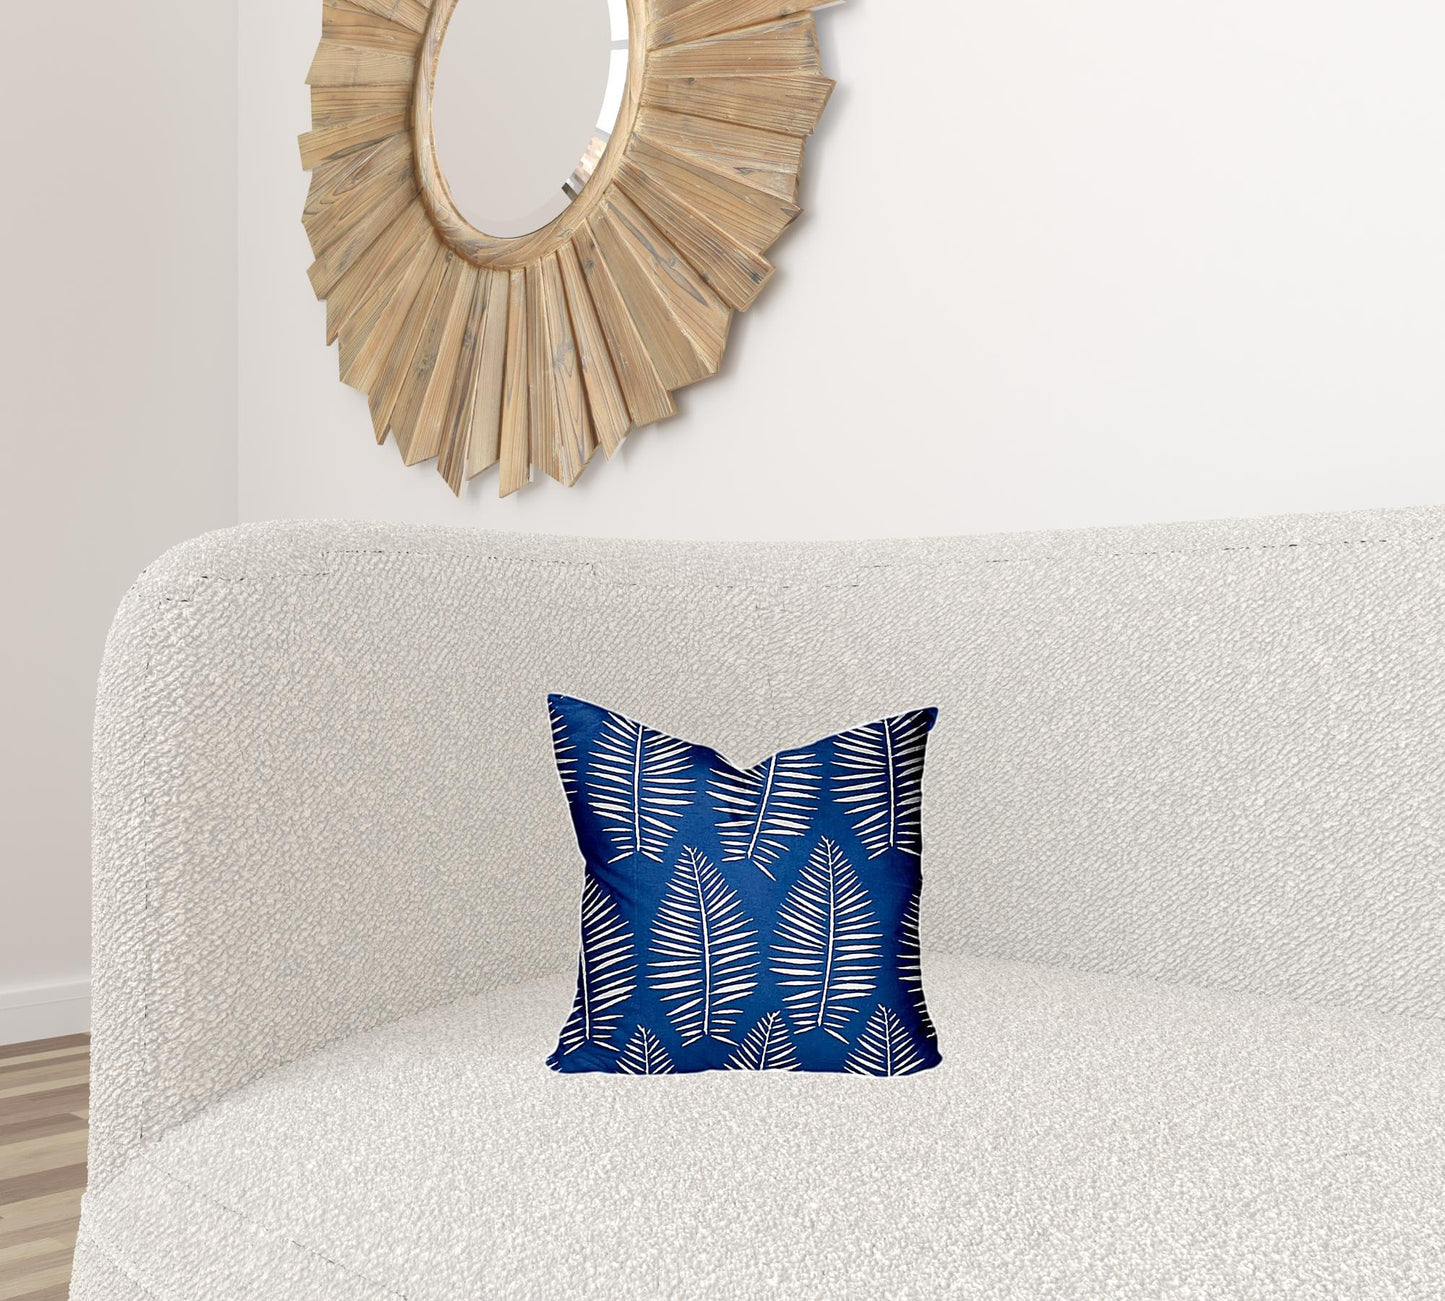 14" X 14" Blue And White Enveloped Tropical Throw Indoor Outdoor Pillow Cover